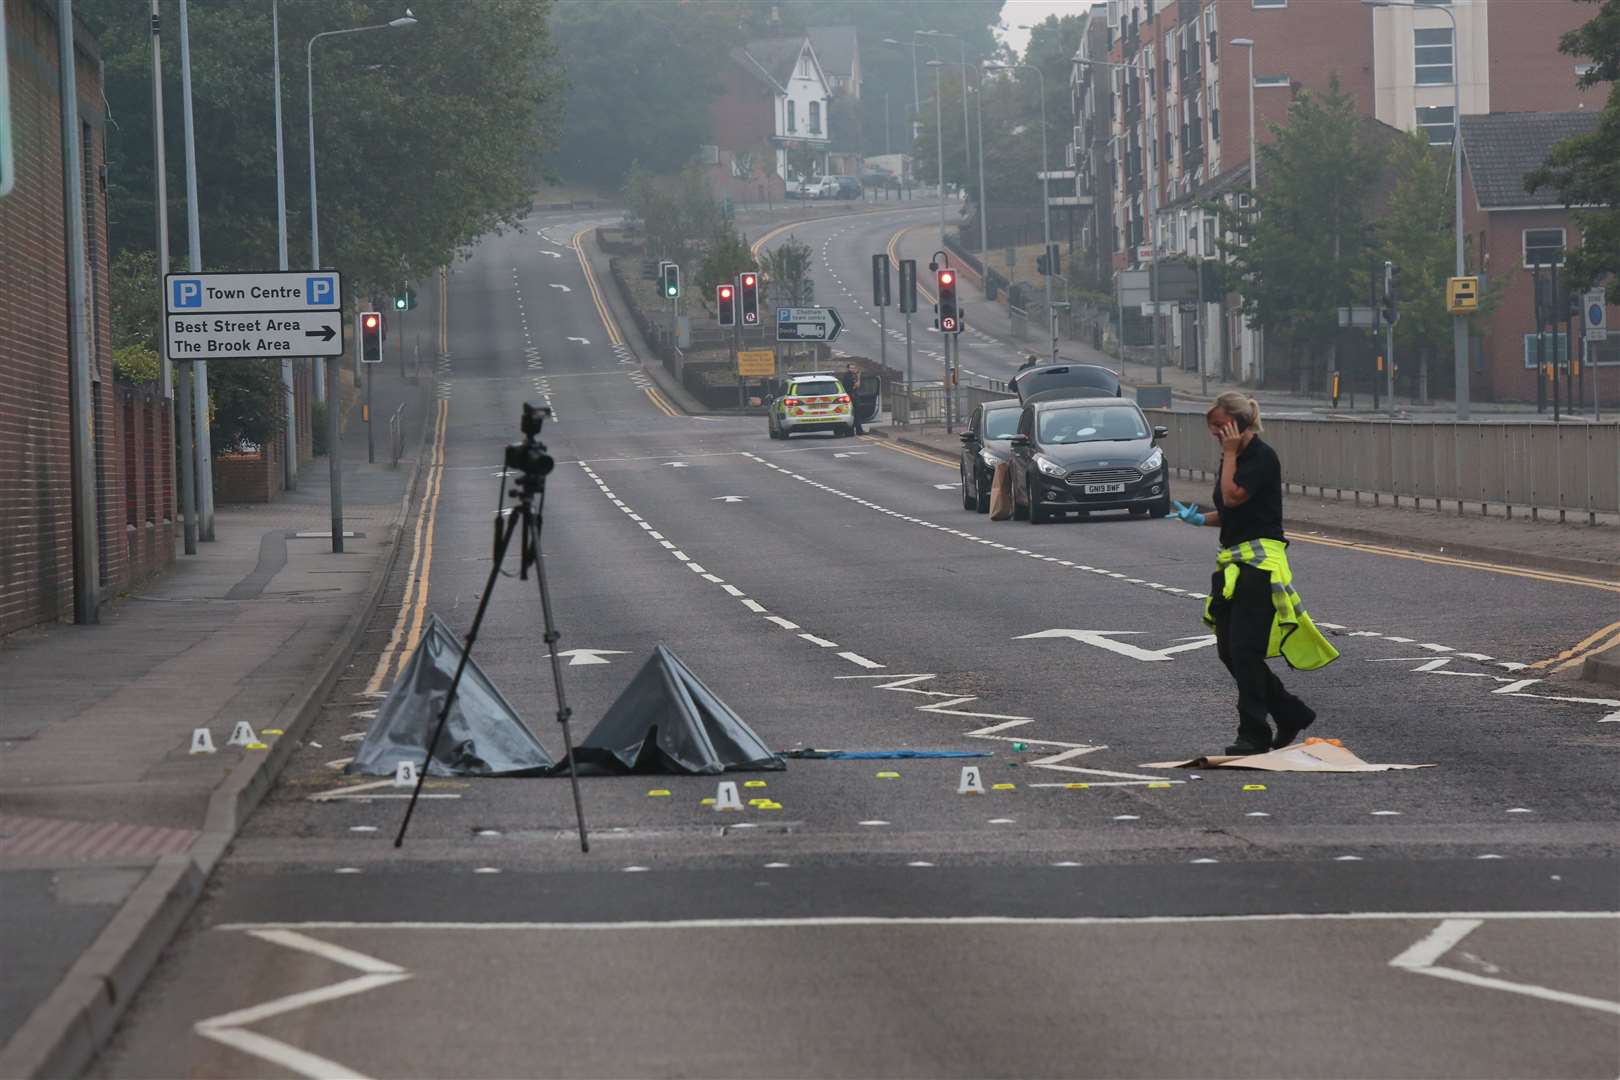 Police at the scene of the hit and run in New Road, Chatham. Images: UKNiP